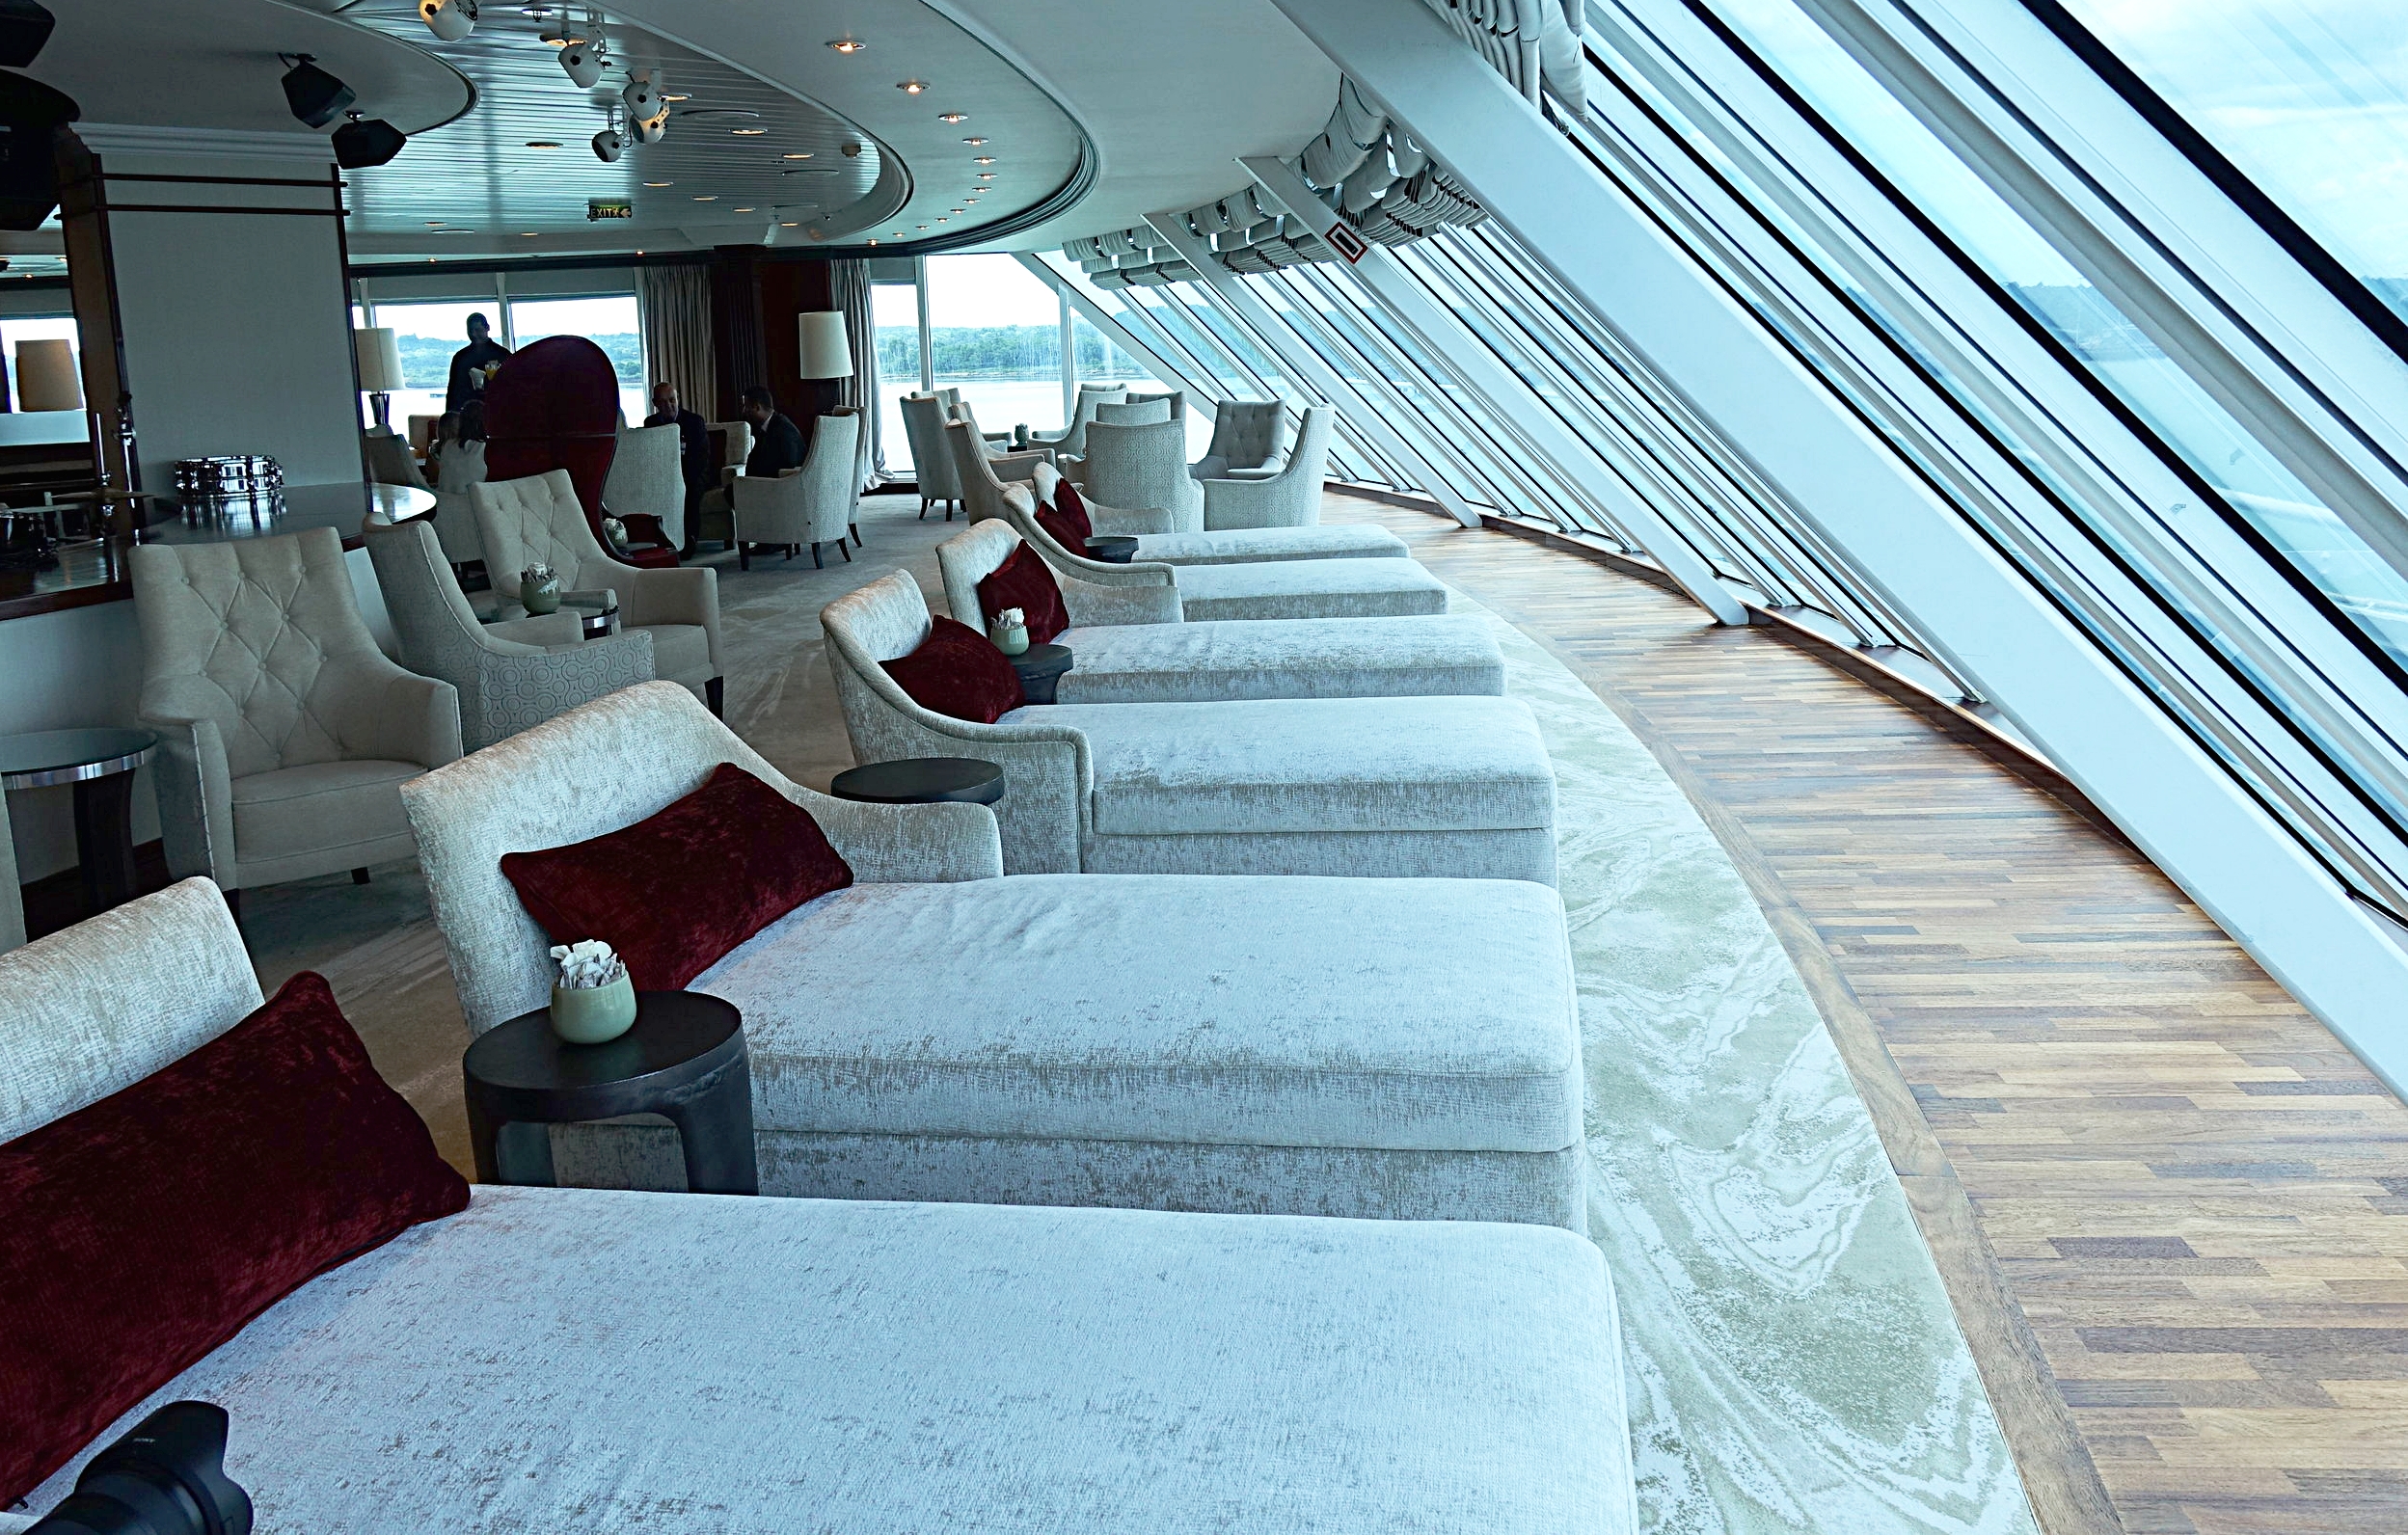  Sumptuous daybeds with a panoramic view over the bow of the ship.  